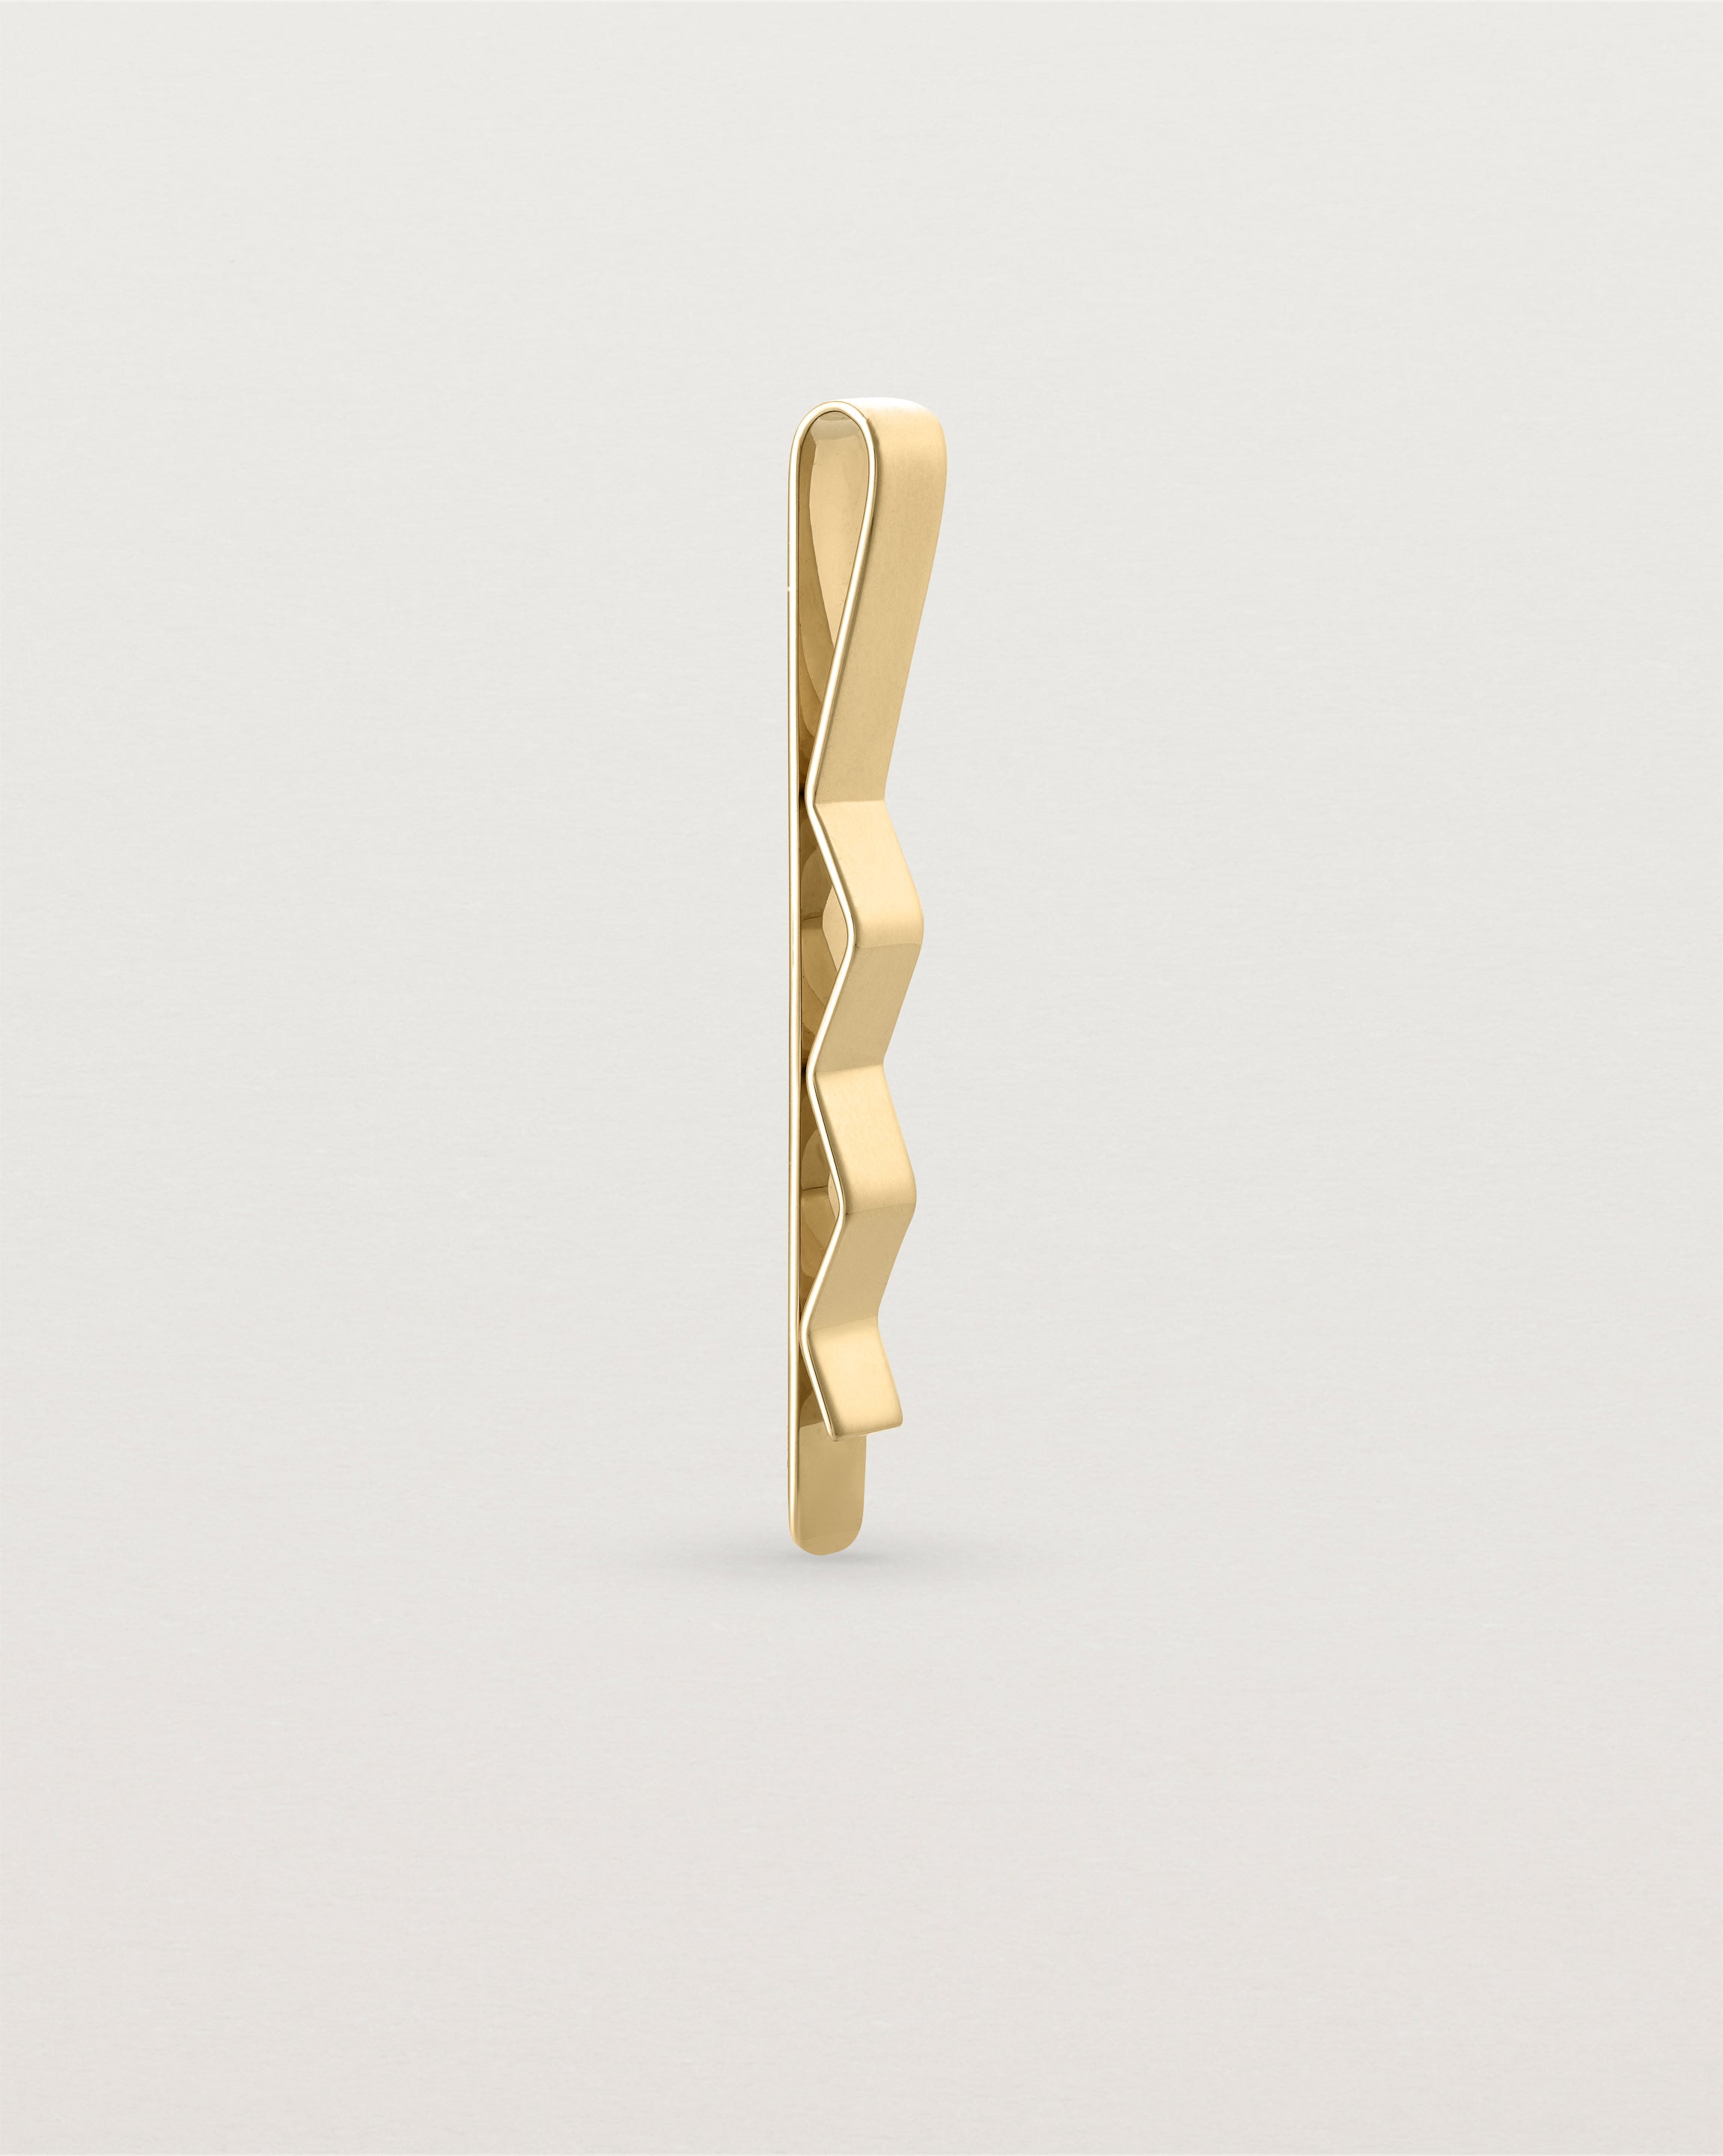 The Turas Tie Bar in Yellow Gold standing.